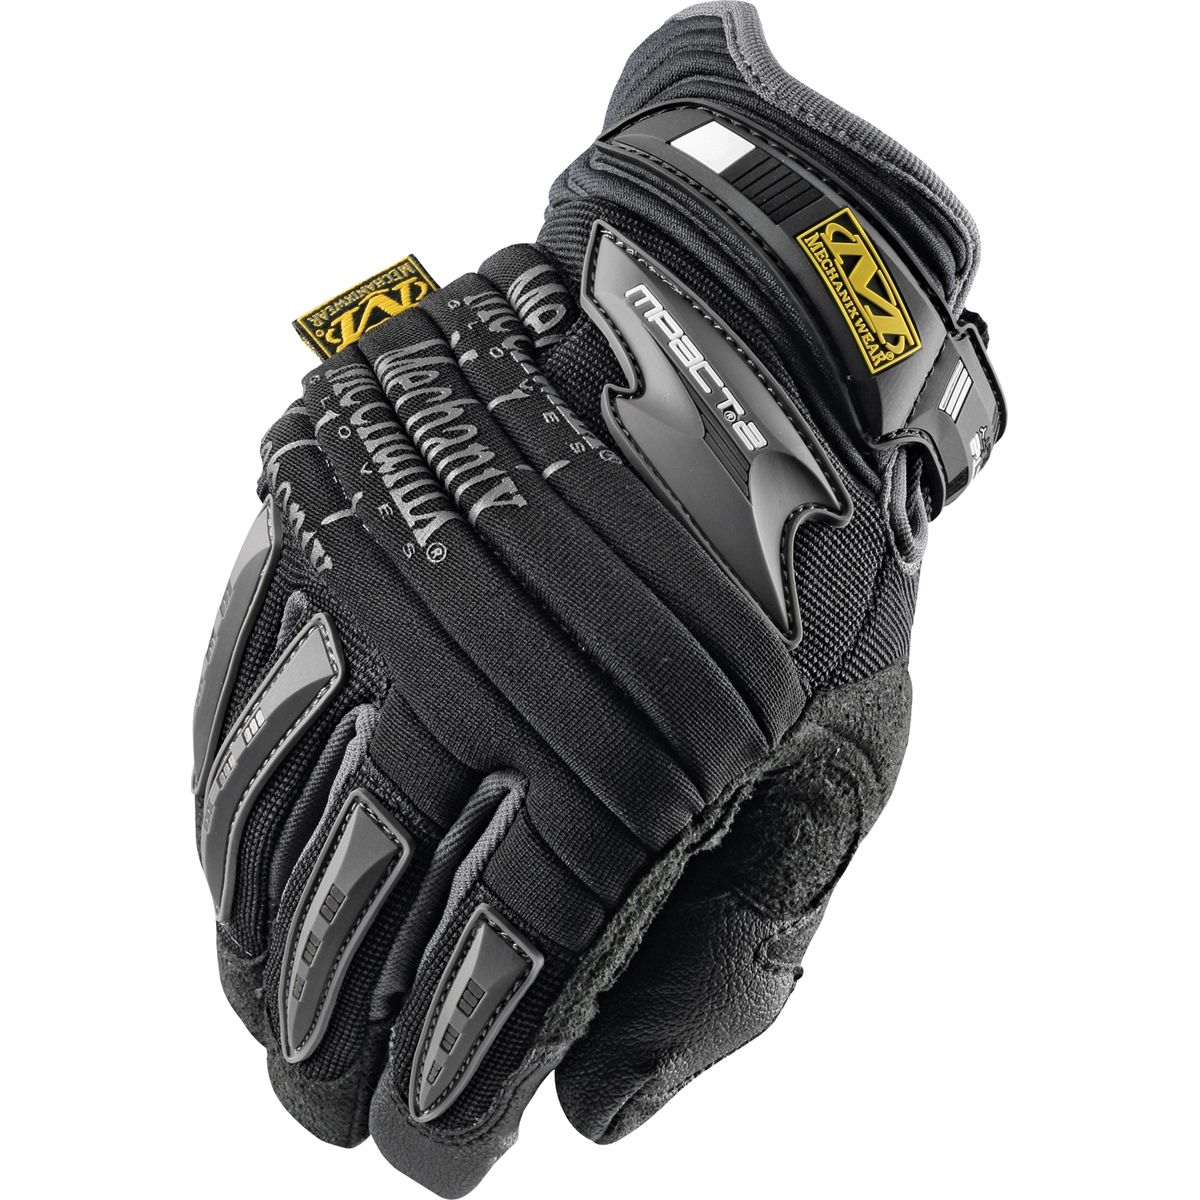 M-Pact II Gloves - Black - Large